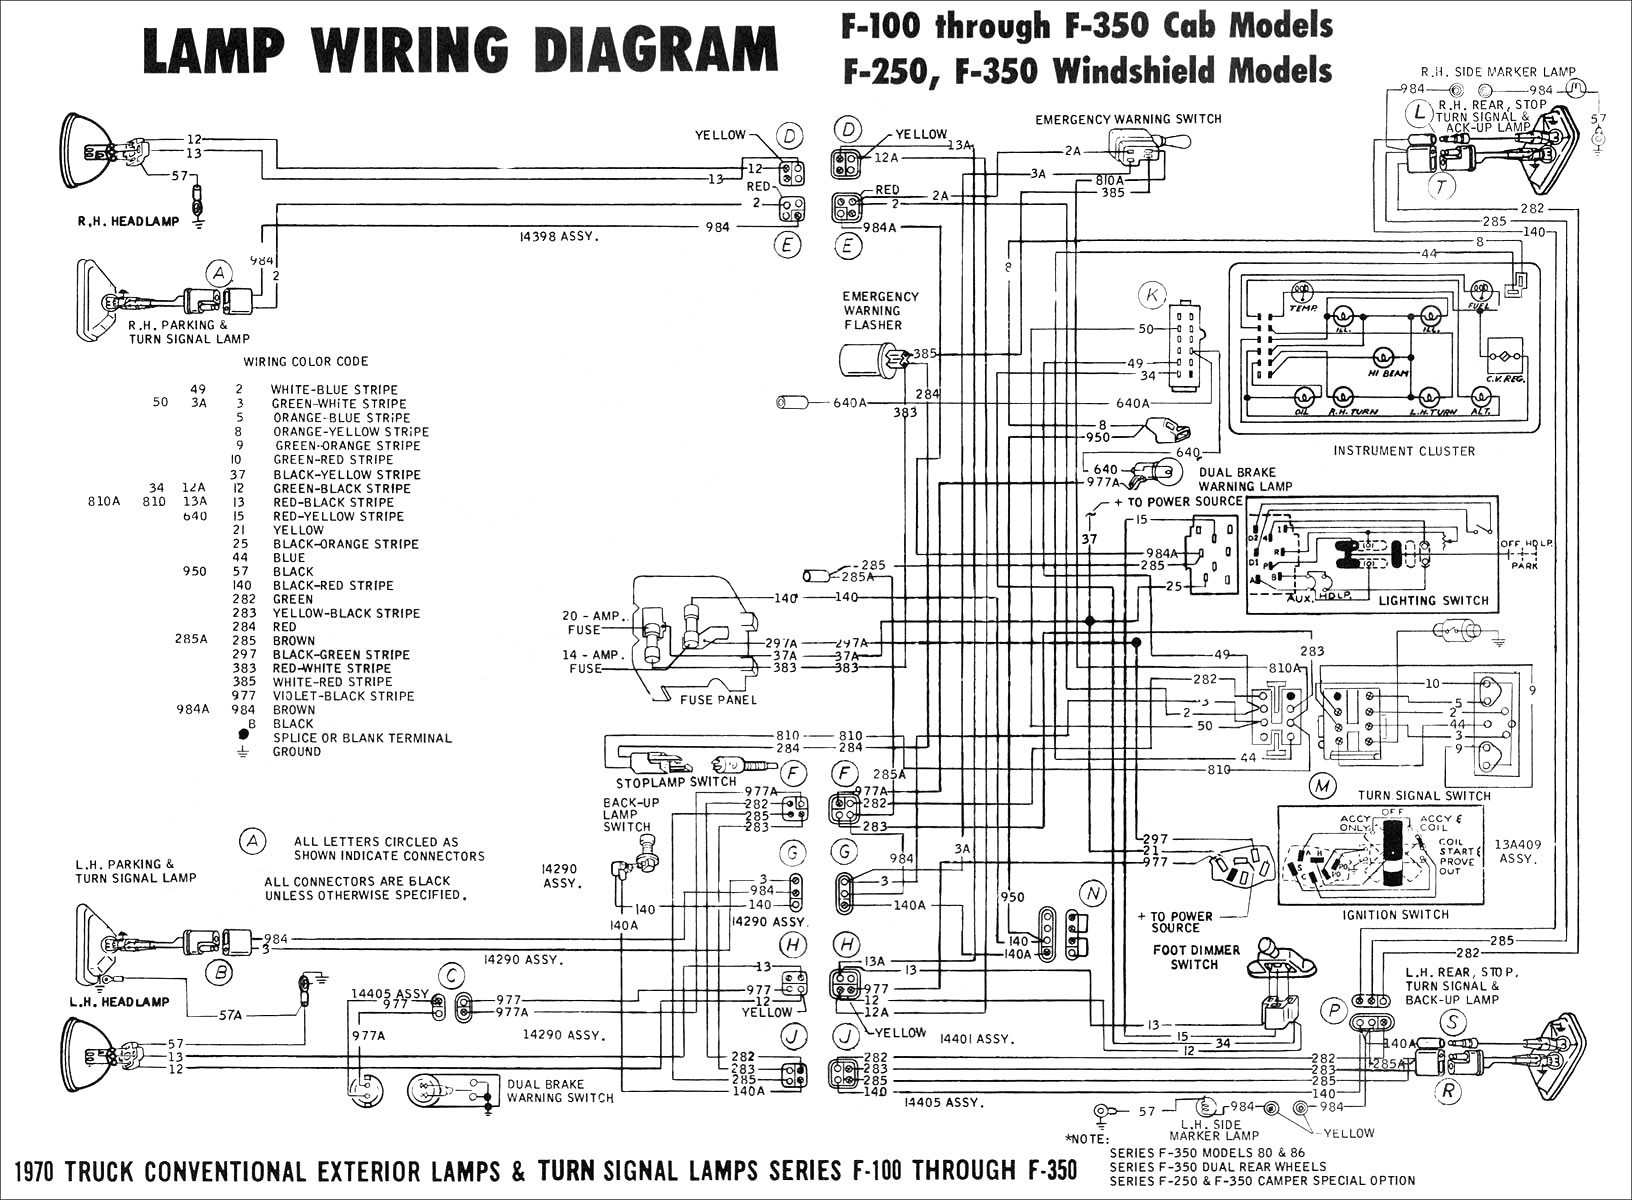 2005 Chrysler Town And Country Wiring Diagram New 2005 Ford Escape 2005 Town And Country Van 2005 Town Country Wiring Diagram